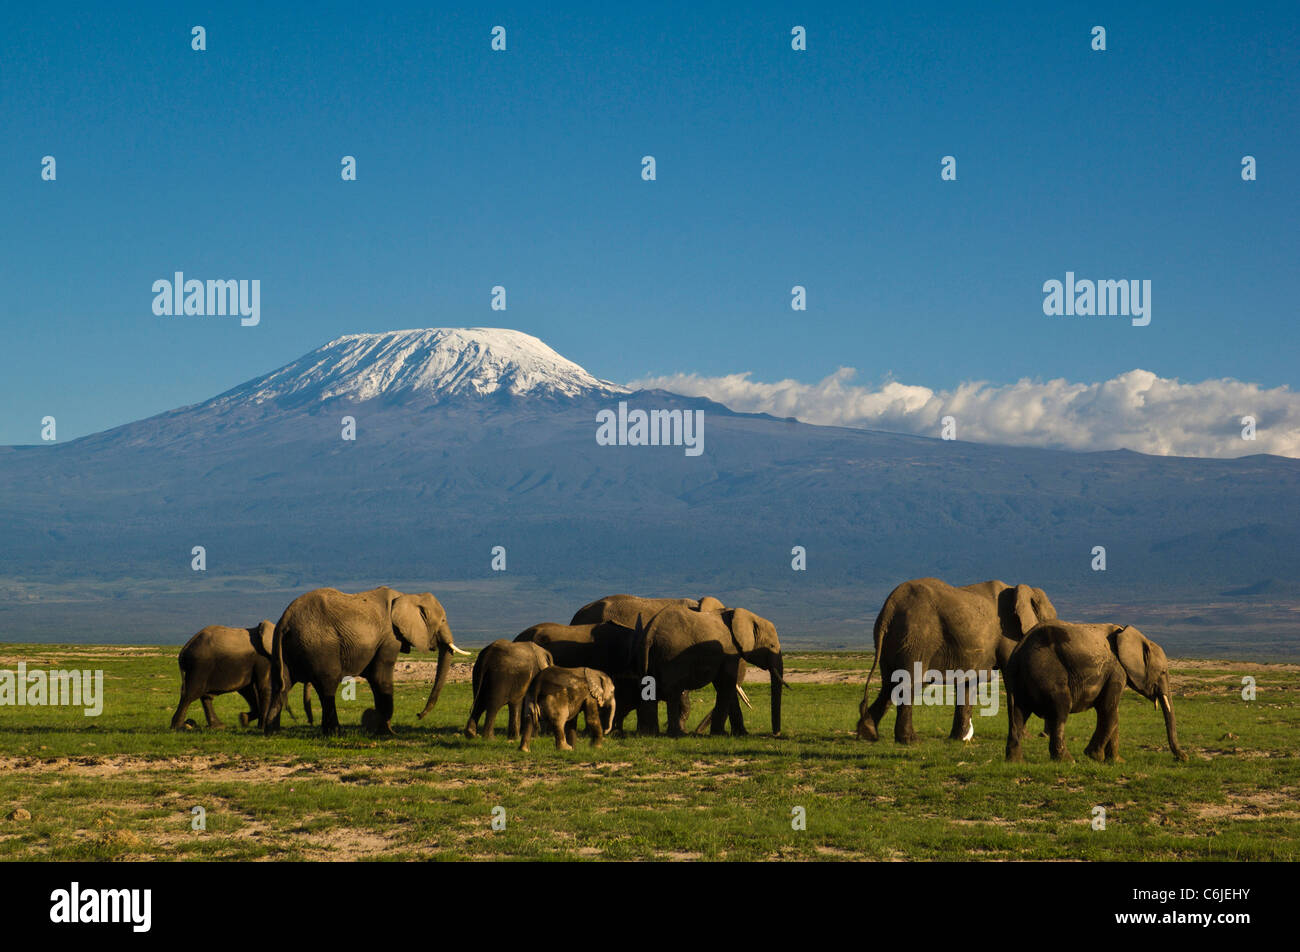 A herd of African elephants with the snow-capped Kibo peak of Mount Kilimanjaro in the background. Stock Photo